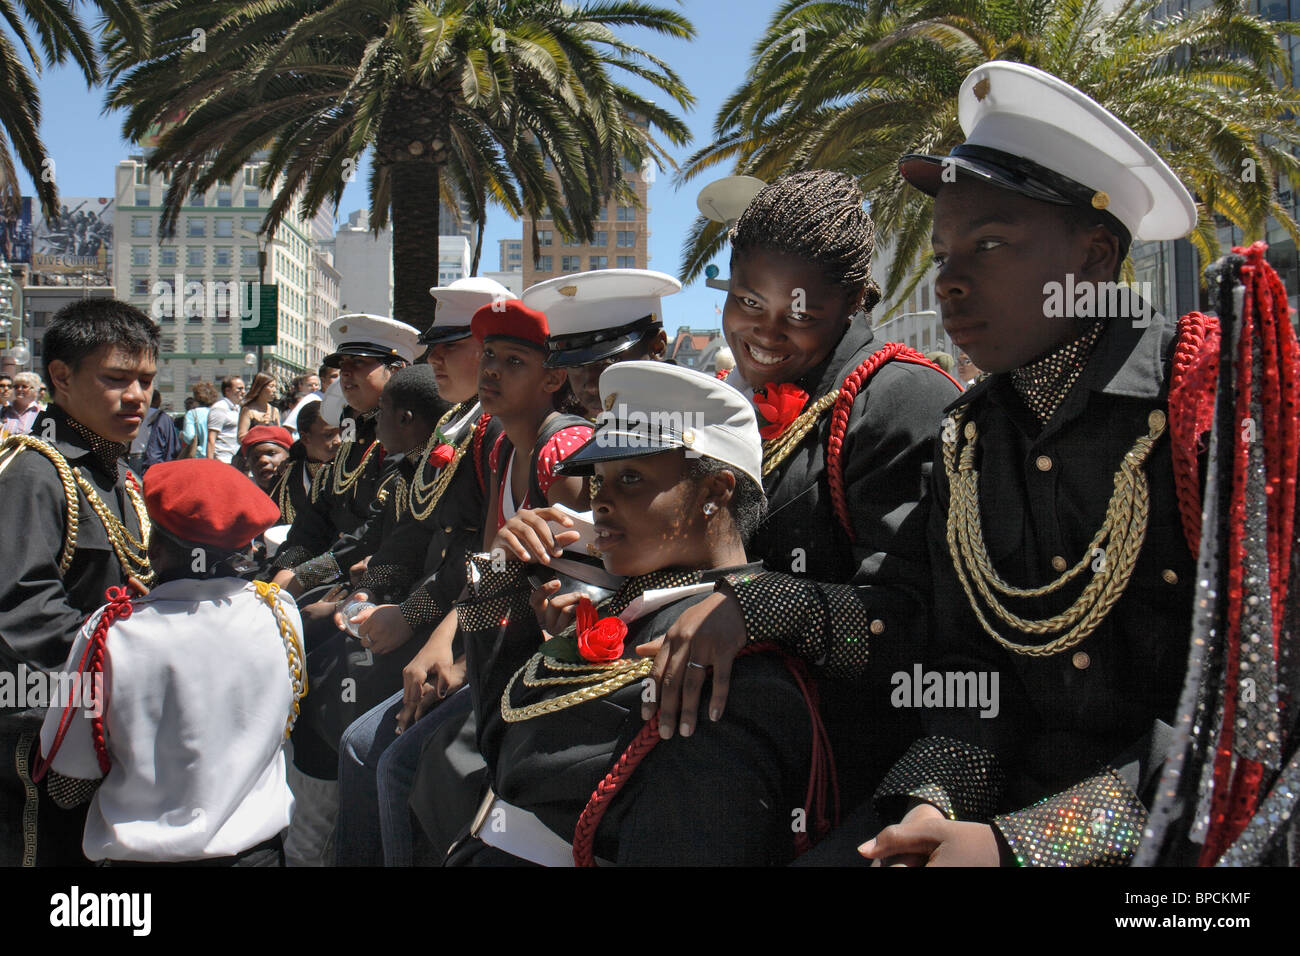 Young people in uniforms during a parade, San Francisco, USA Stock Photo